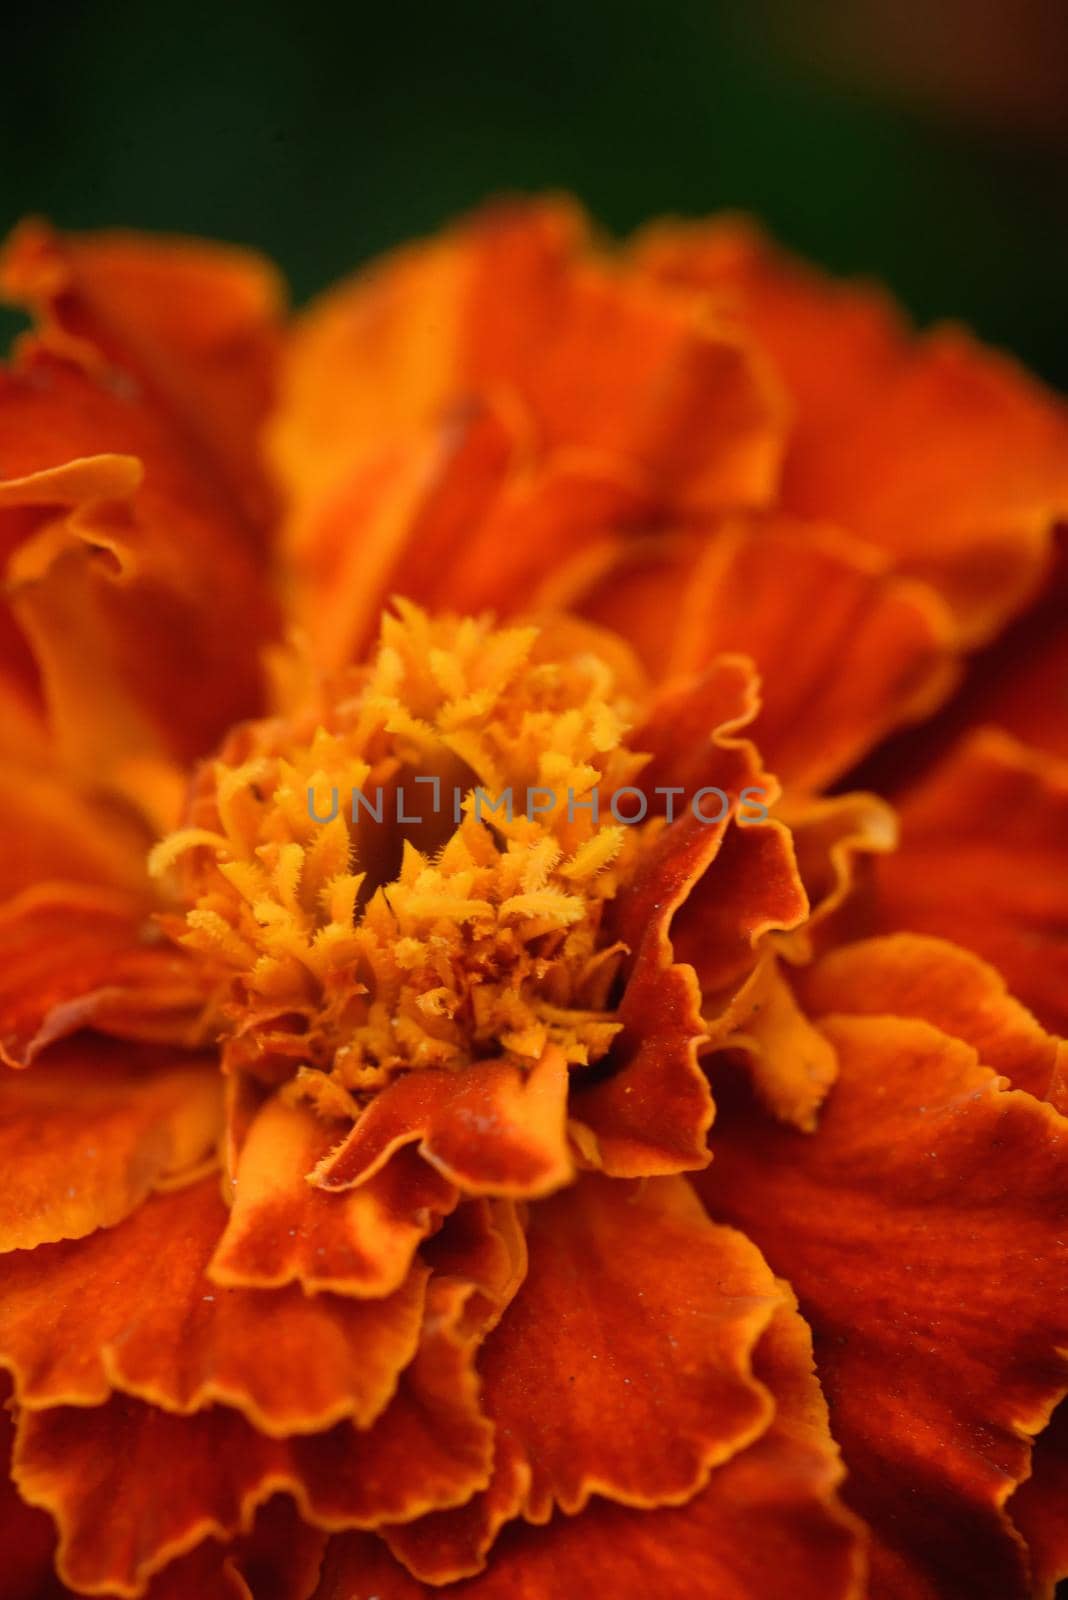 Extreme close-up photograph of marigolds flower bud in garden.